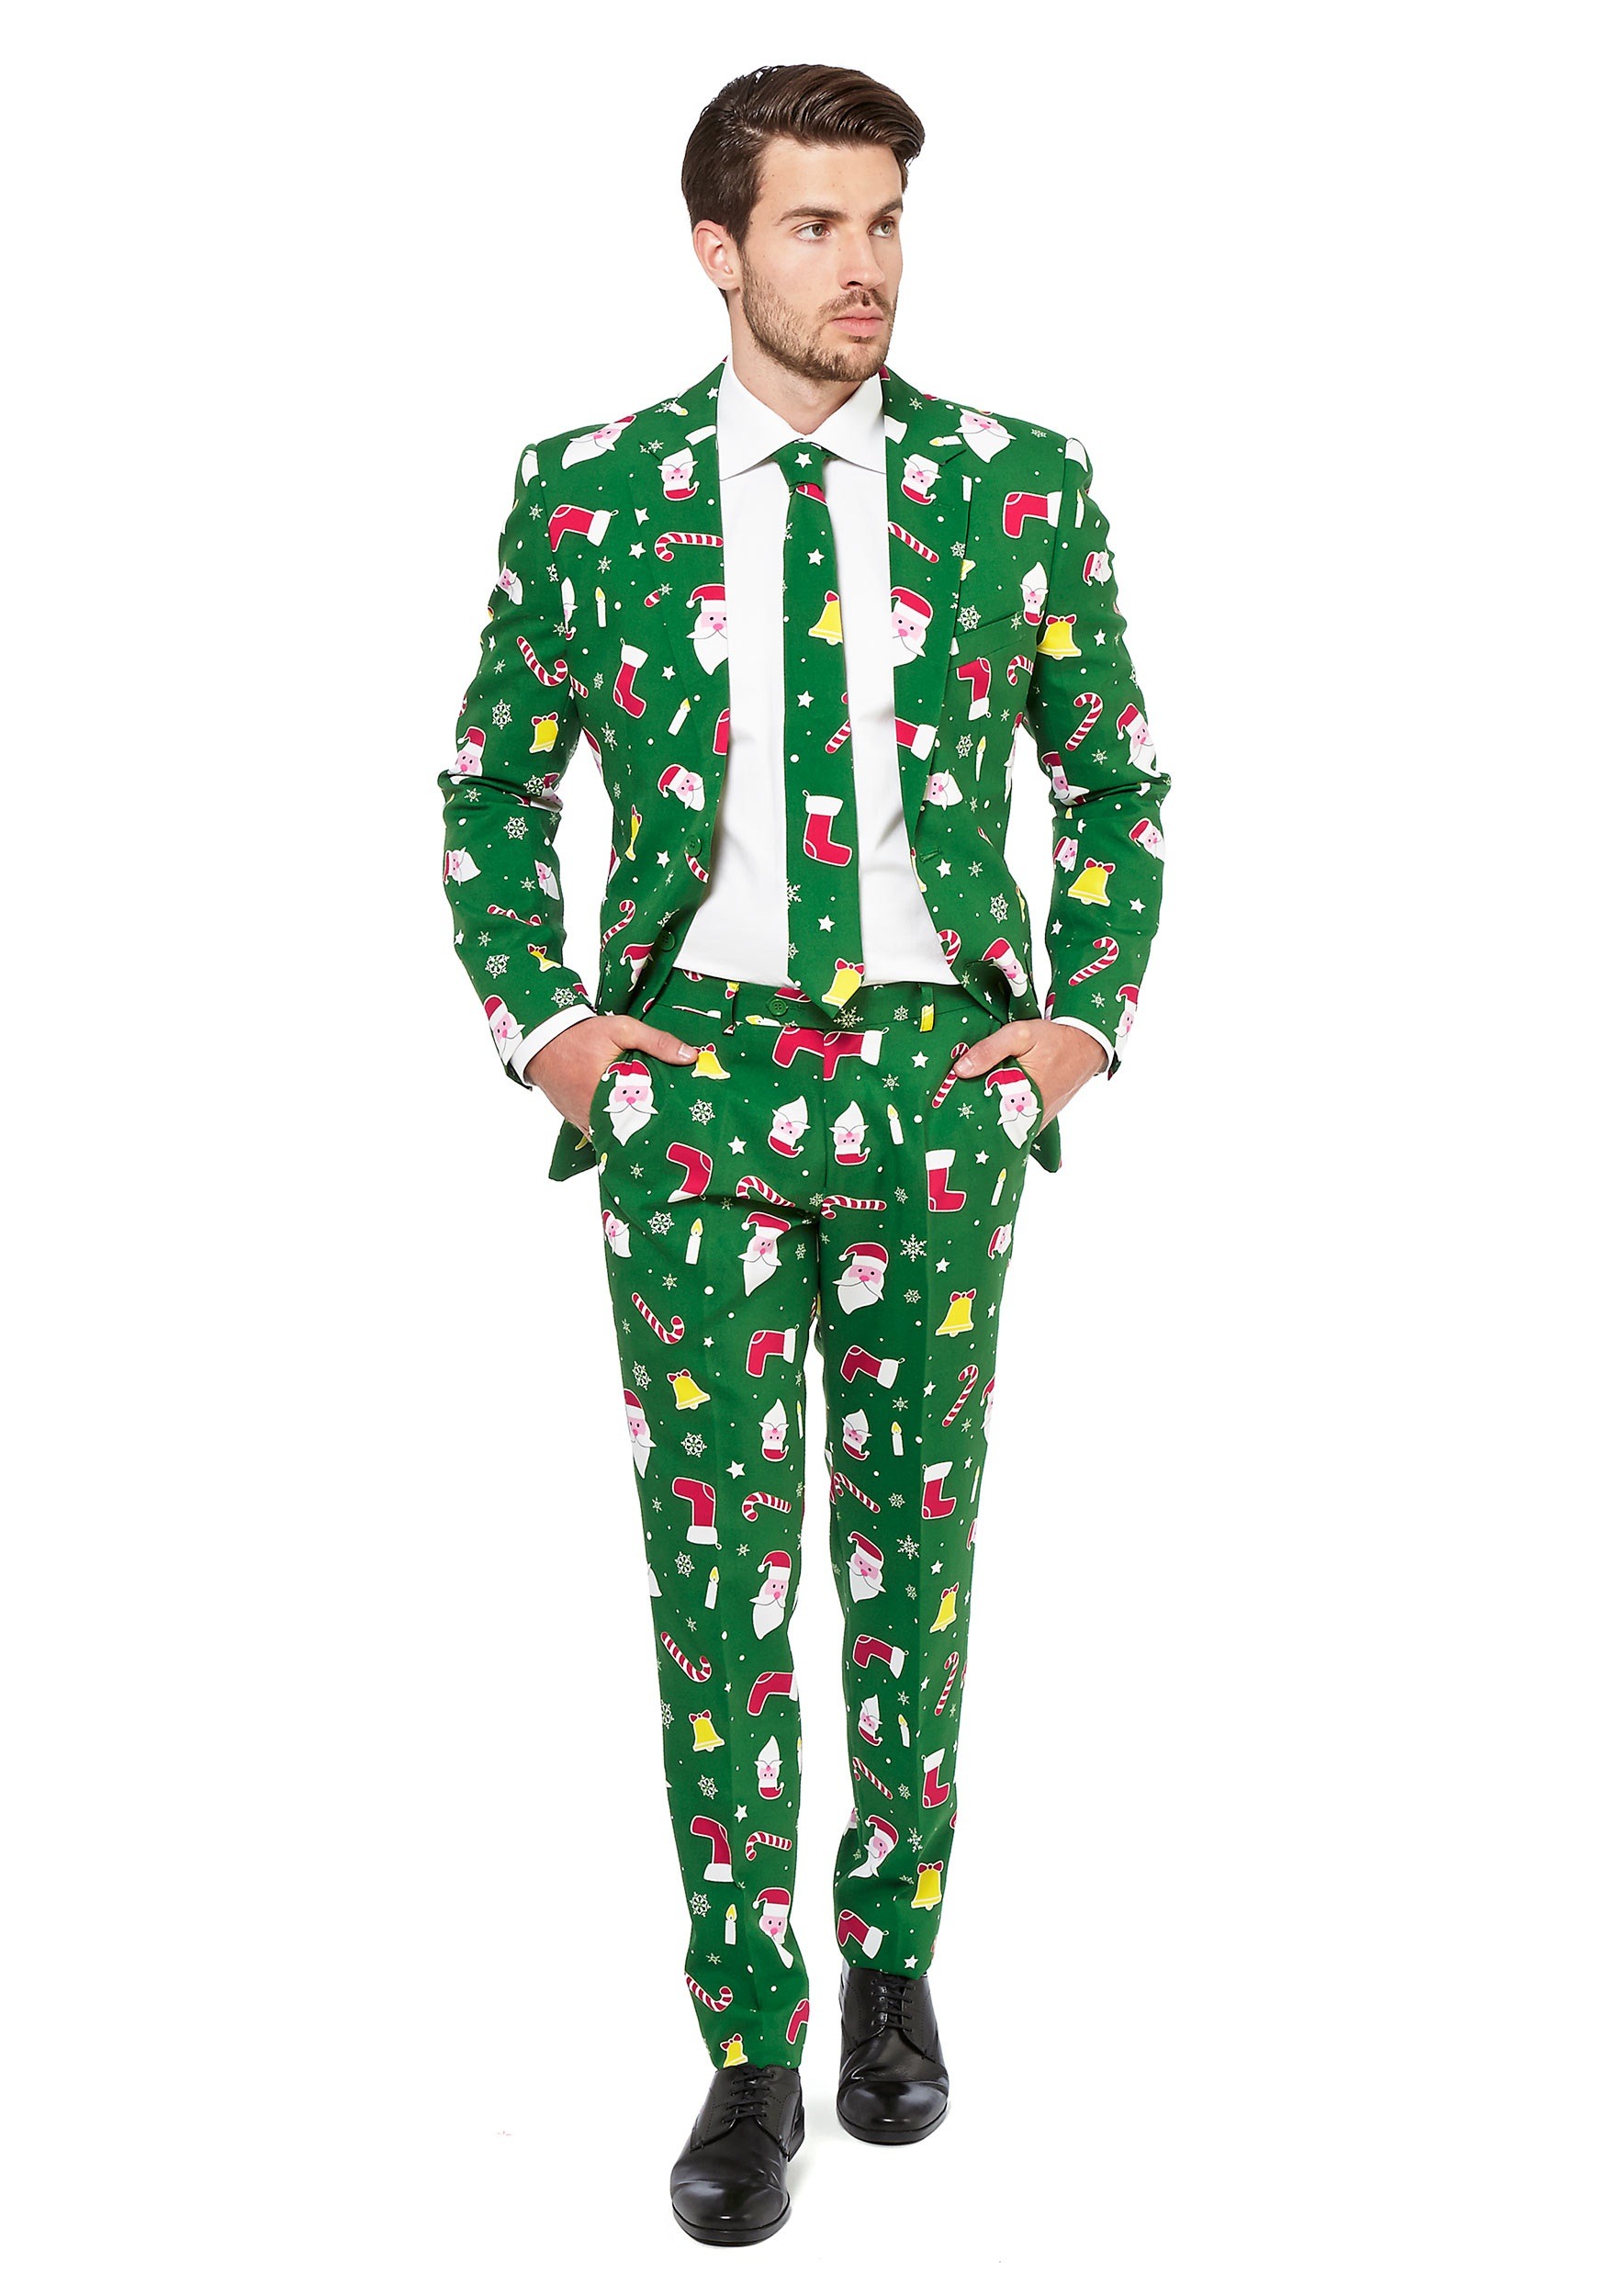 Santaboss Suit by Opposuits